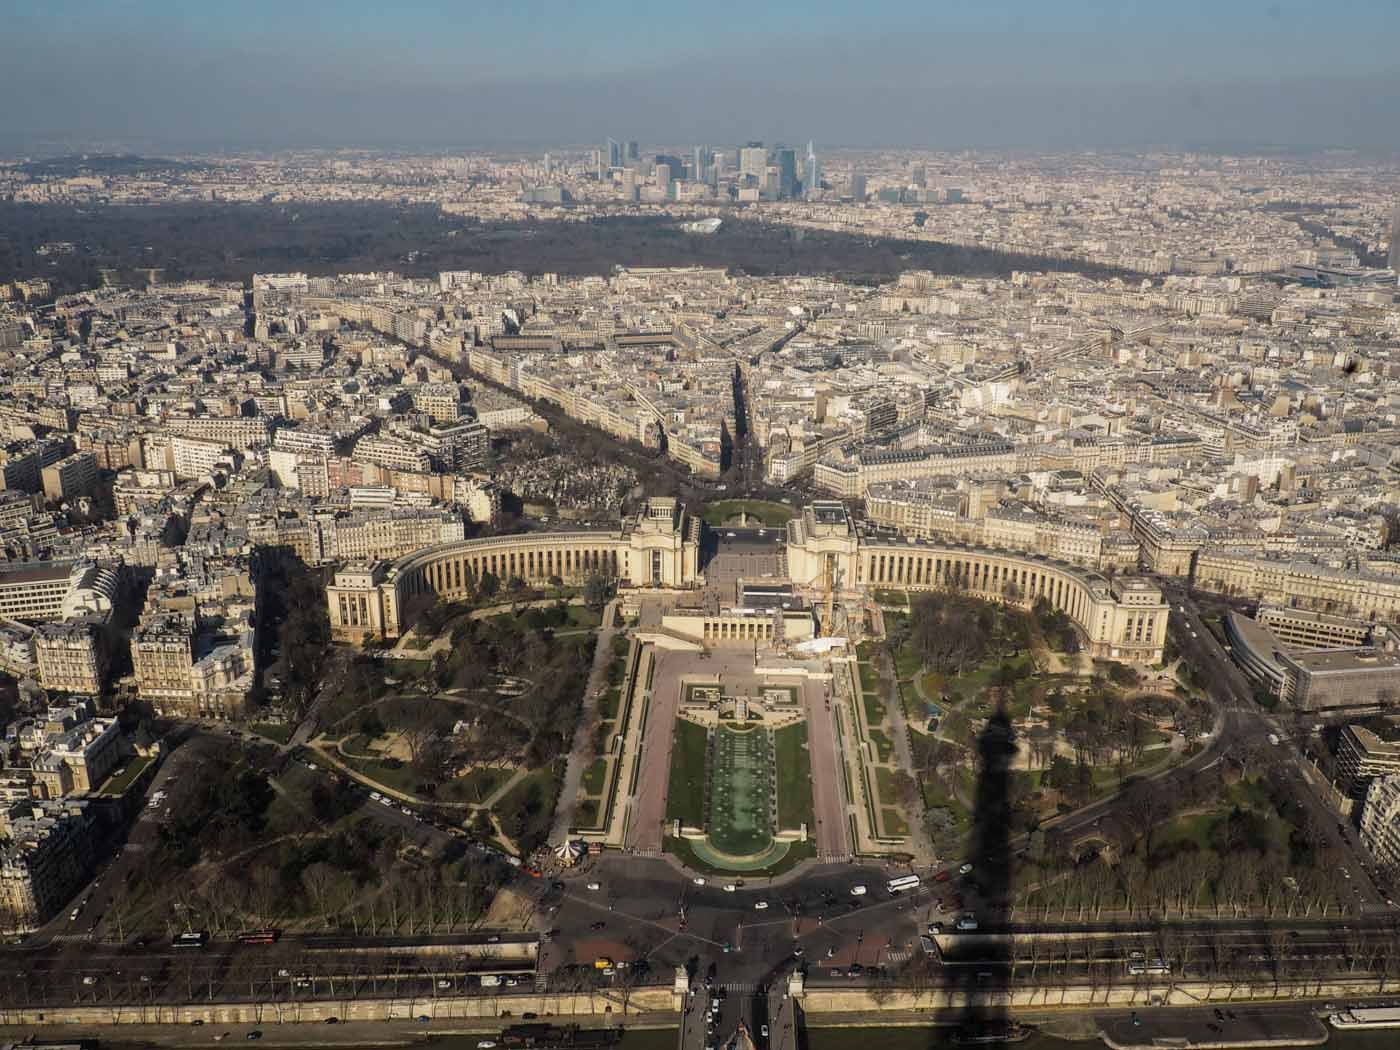 View from the top of The Eiffel Tower